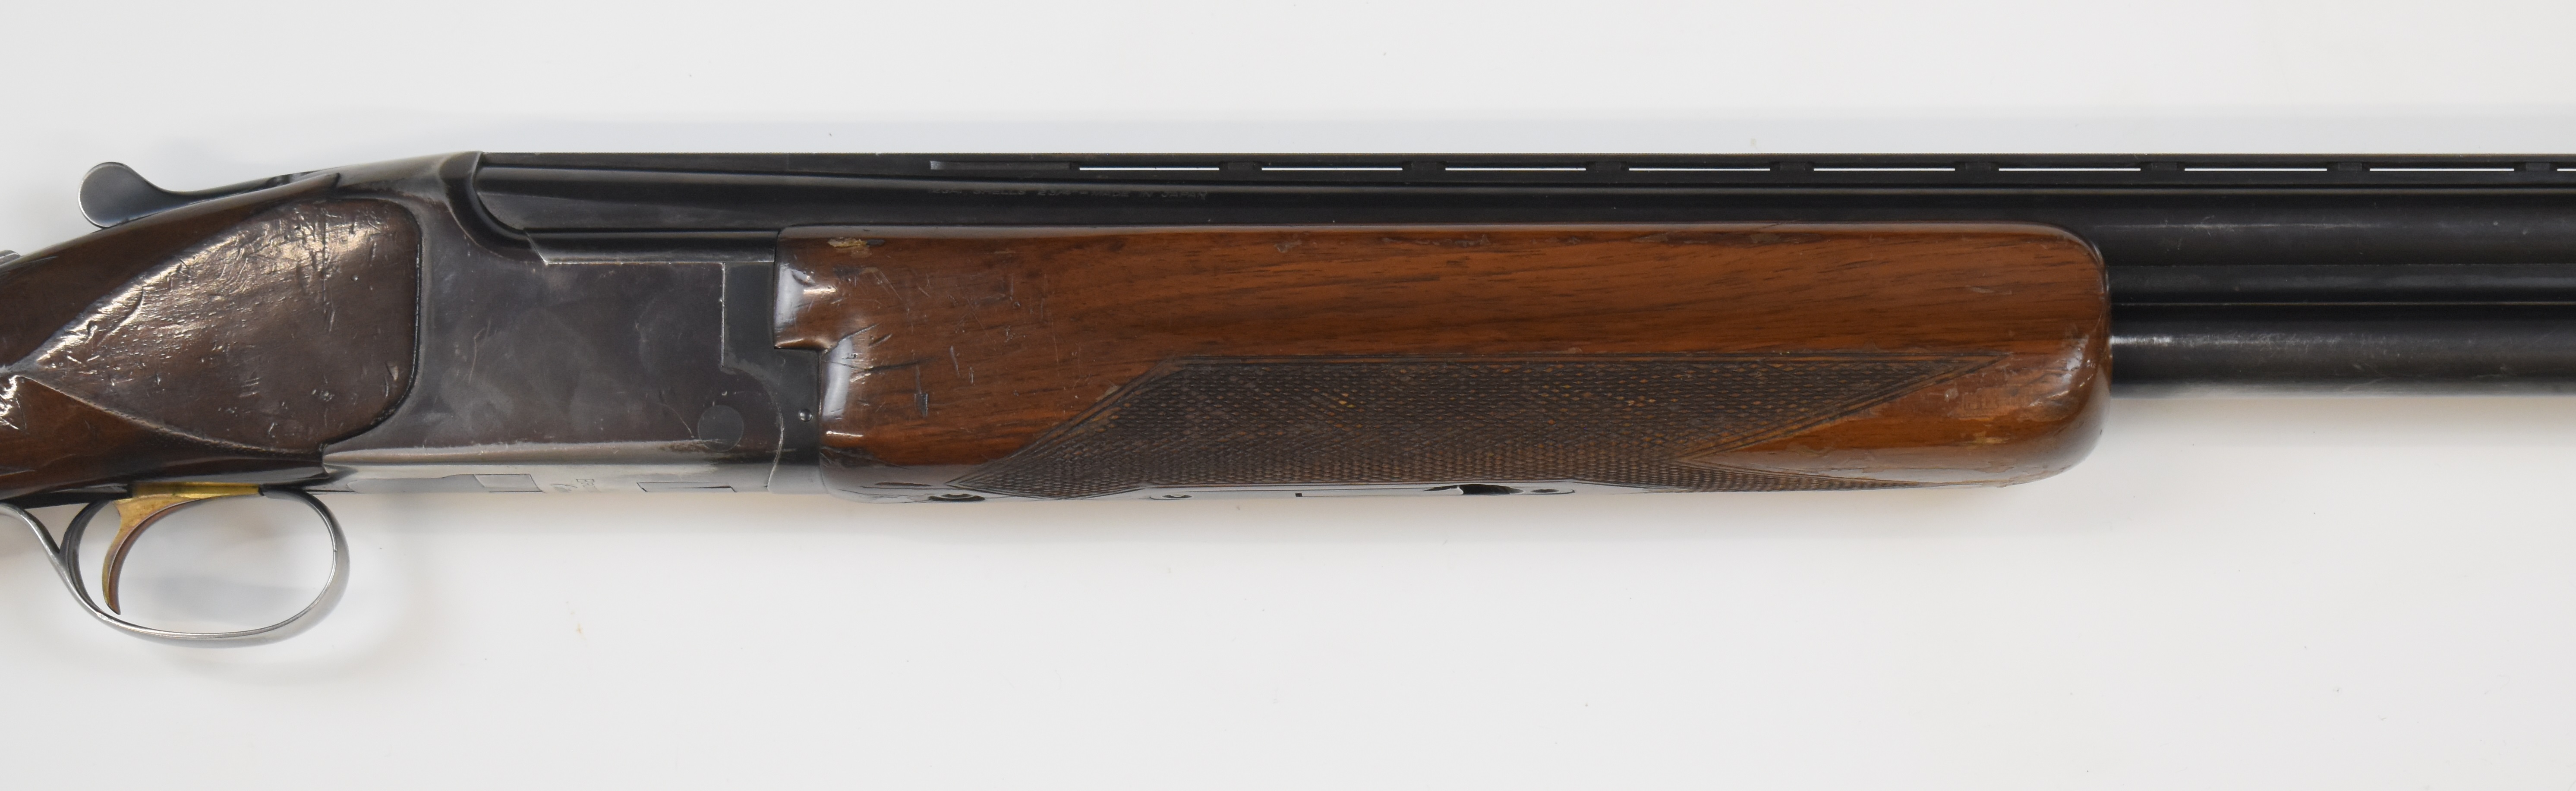 Browning Citori 12 bore over and under ejector shotgun with named underside, chequered semi-pistol - Image 4 of 10